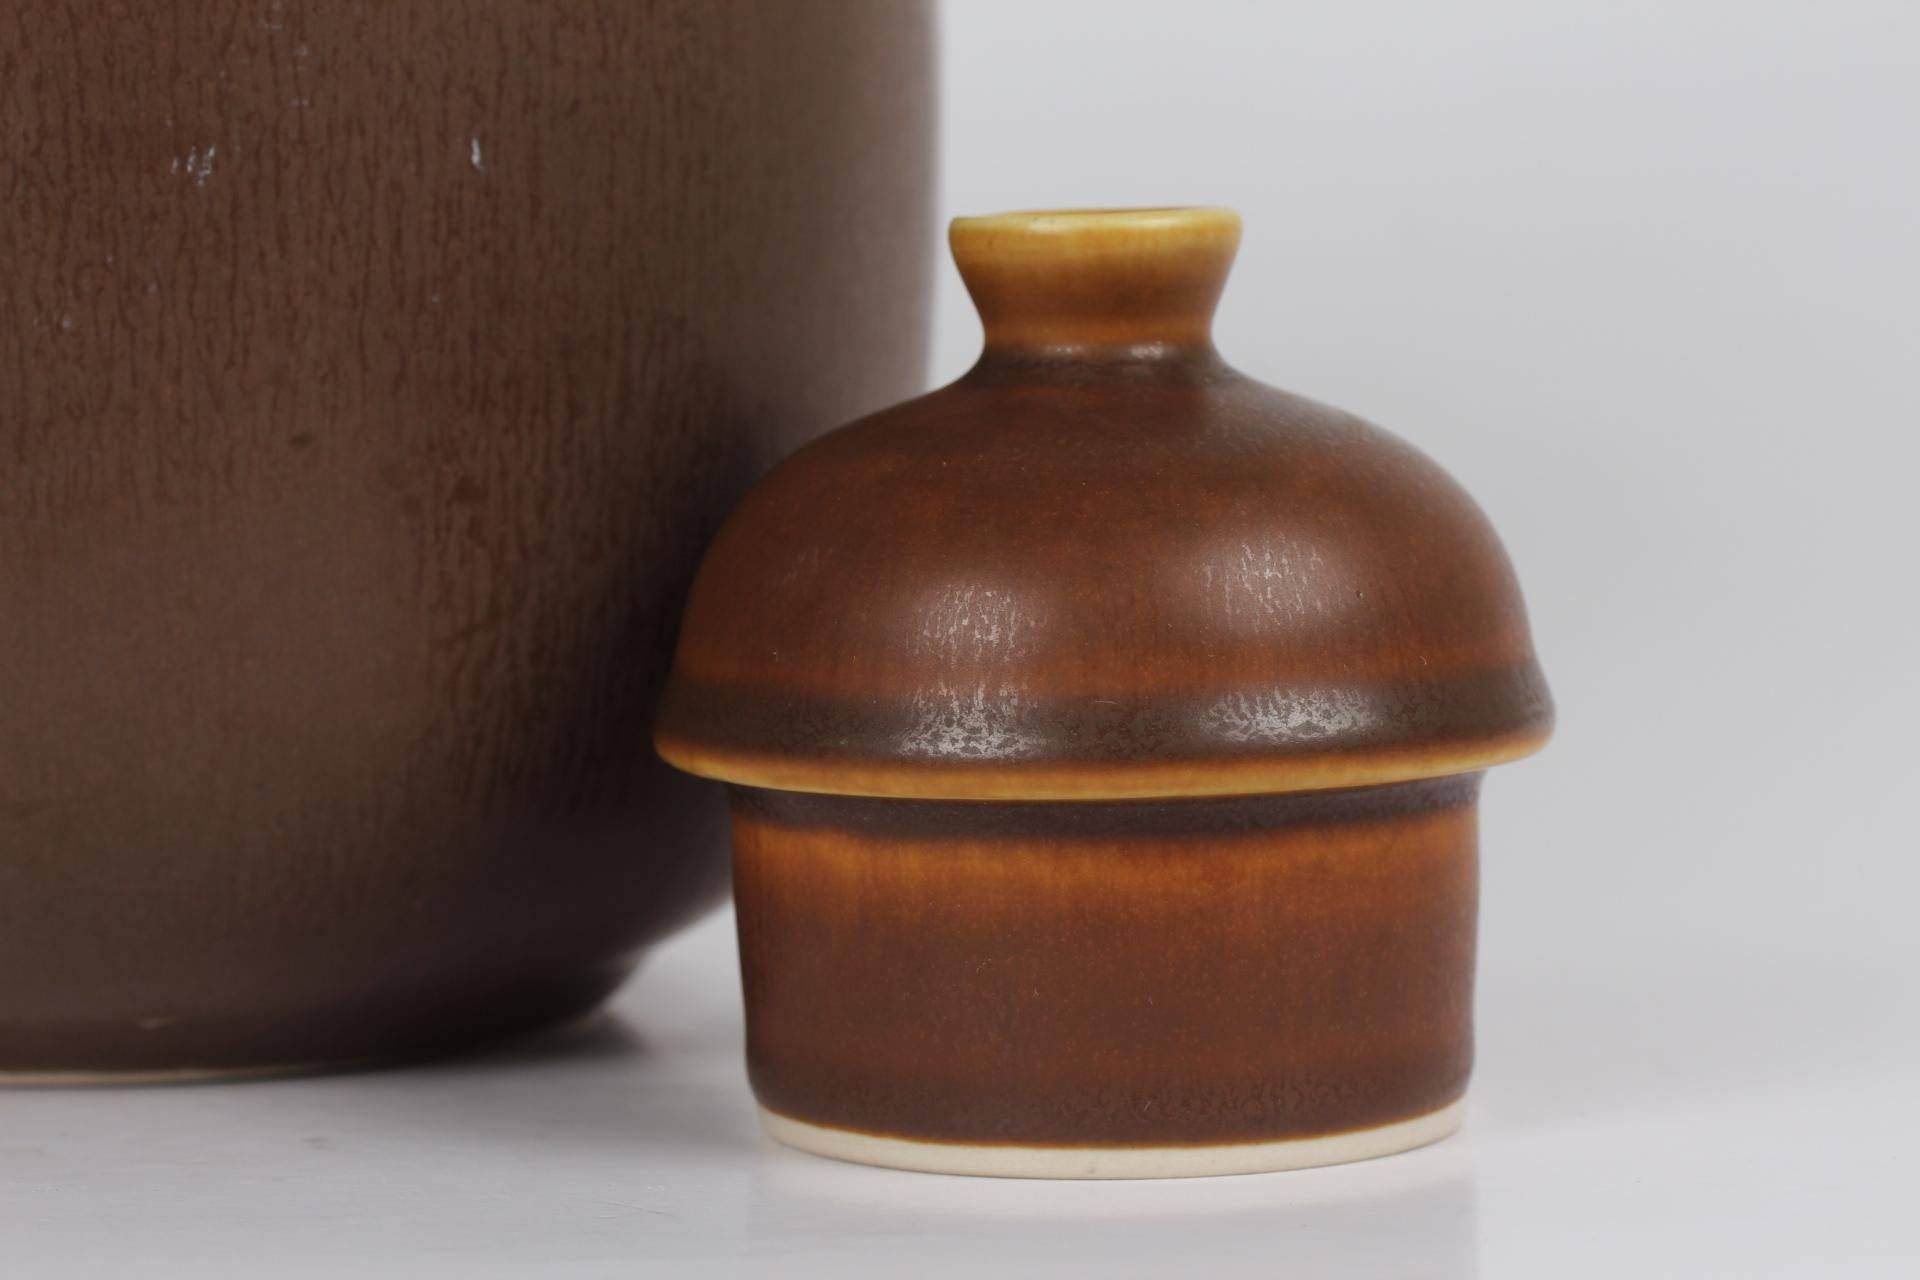 Ceramic teapot designed by the Danish ceramist Frode Bahnsen and manufactured by Palshus

The teapot is decorated with haresfure glaze in brown and ocher colors and has a bast handle 
Stamped in the bottom Palshus Denmark and FB for Frode